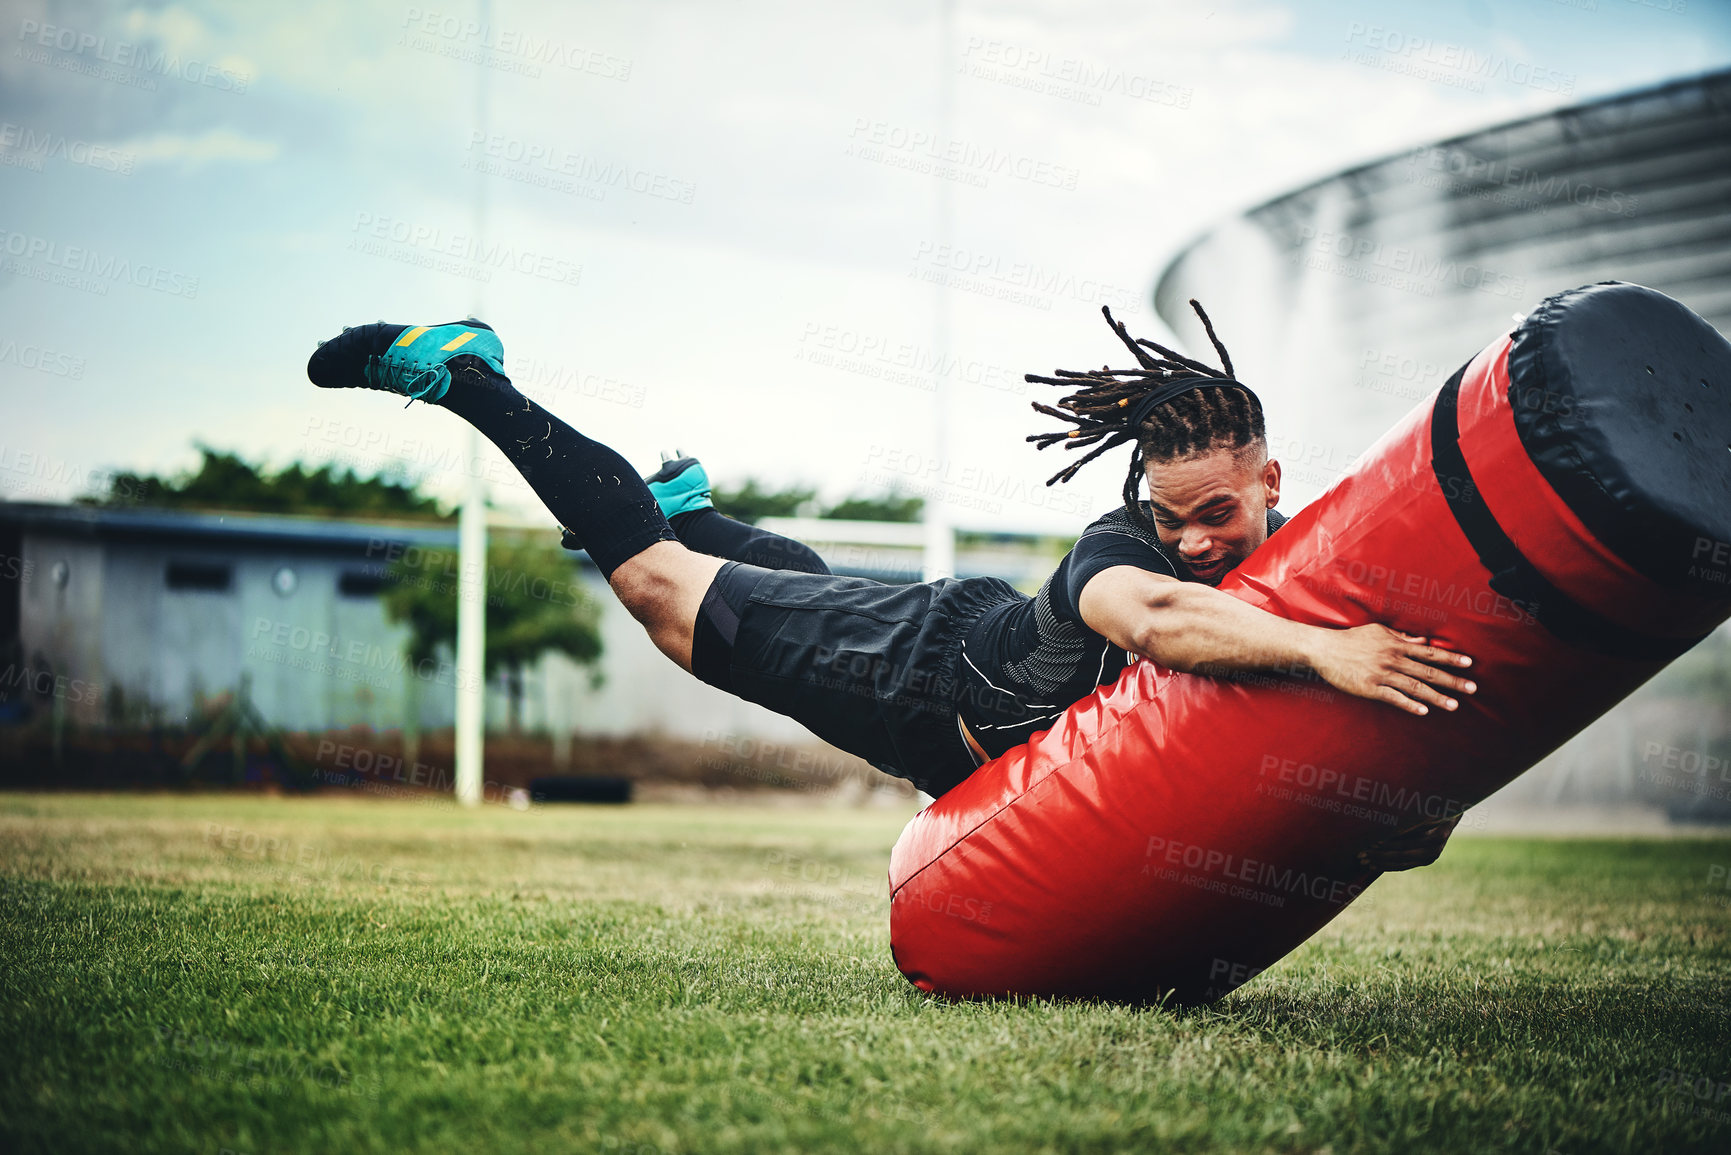 Buy stock photo Full length shot of a handsome young rugby player working out with a tackle bag on the playing field